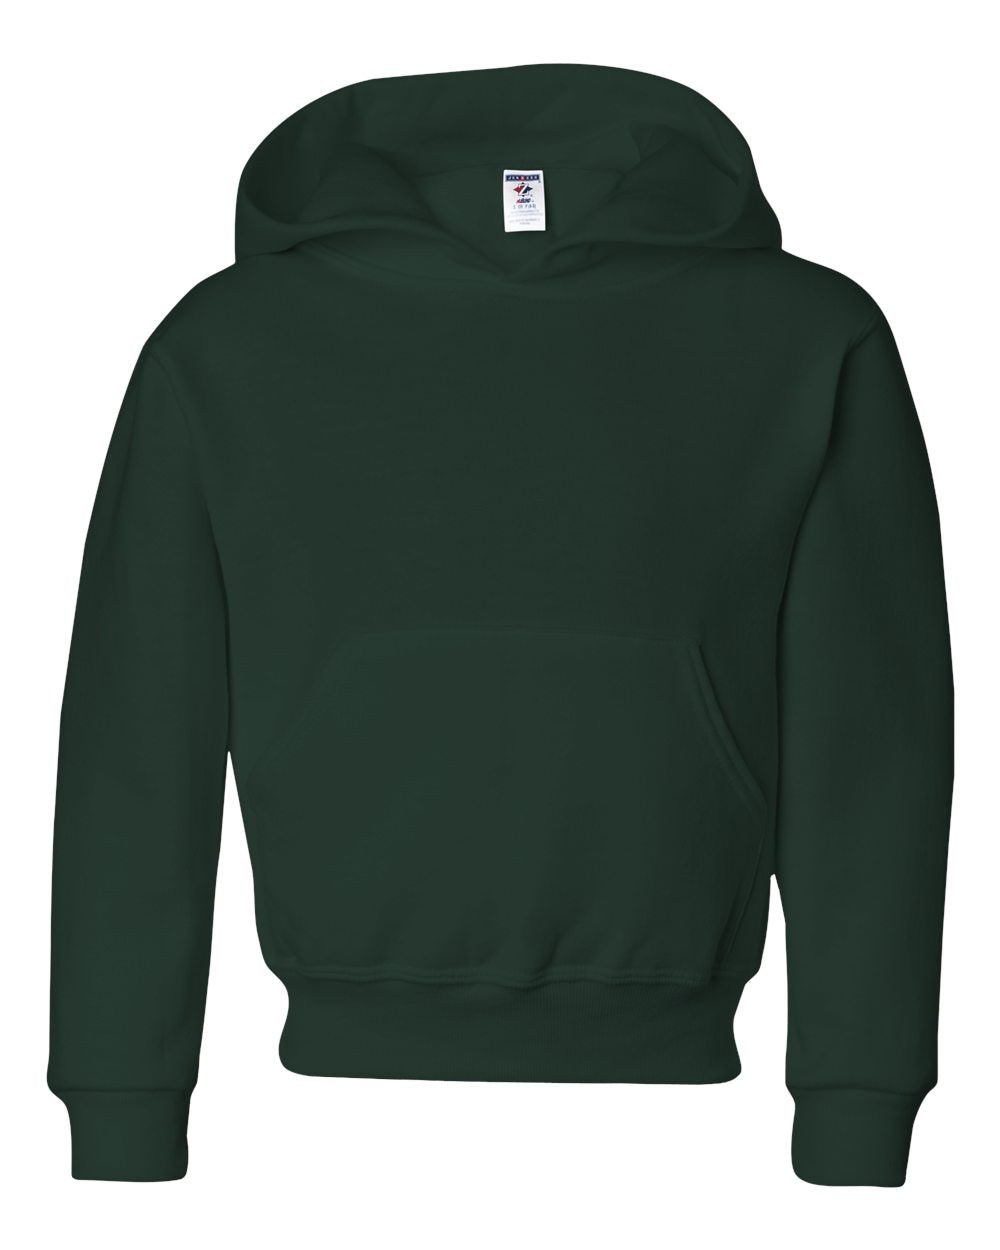 Jerzees Youth Hoodie (996YR) in Forest Green